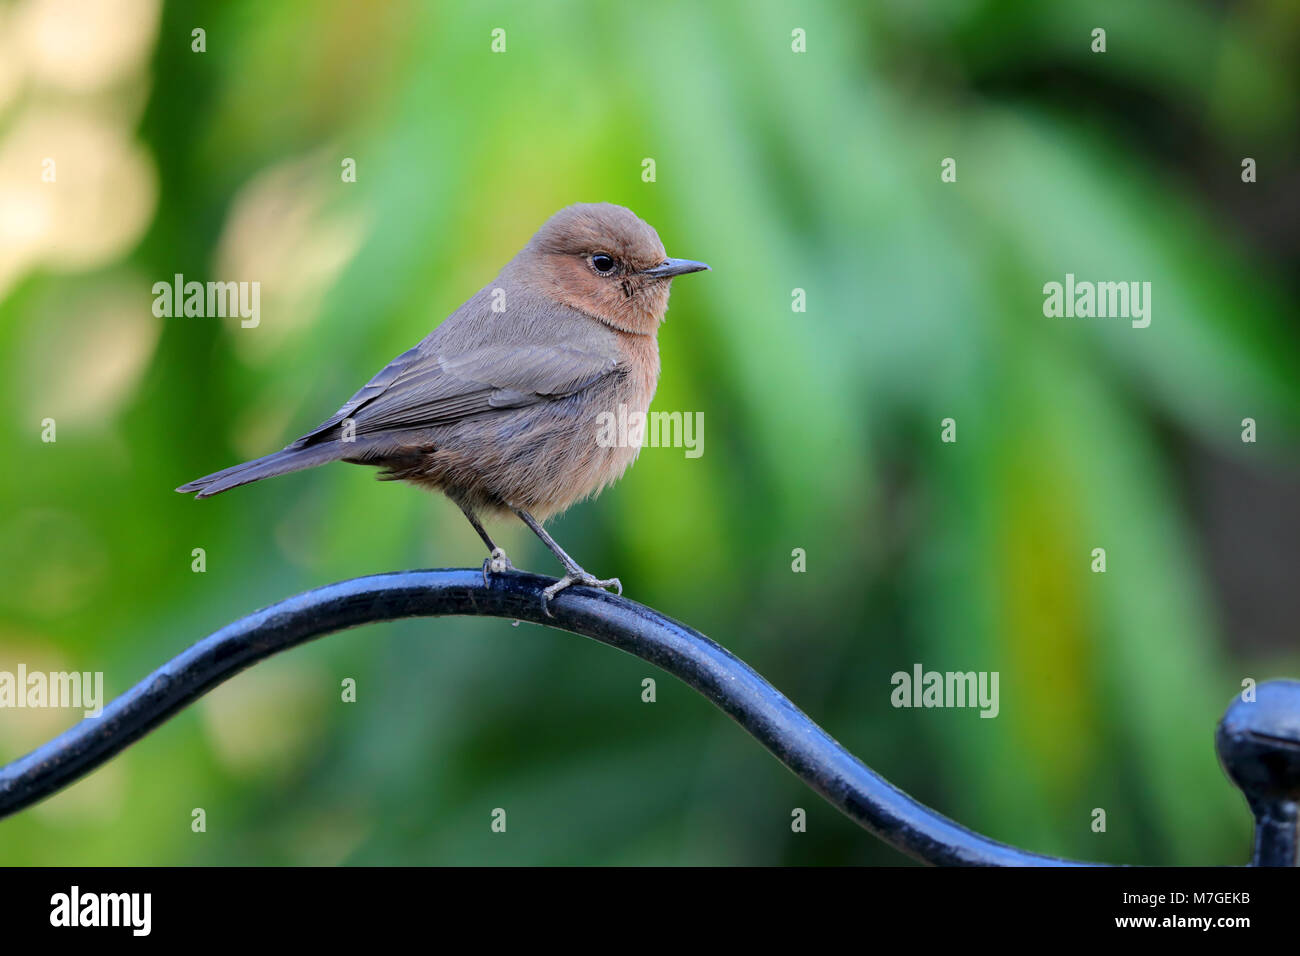 An adult Brown Rock Chat (Oenanthe fusca) bird perched in a garden in Nawalgarh, Rajasthan, India Stock Photo